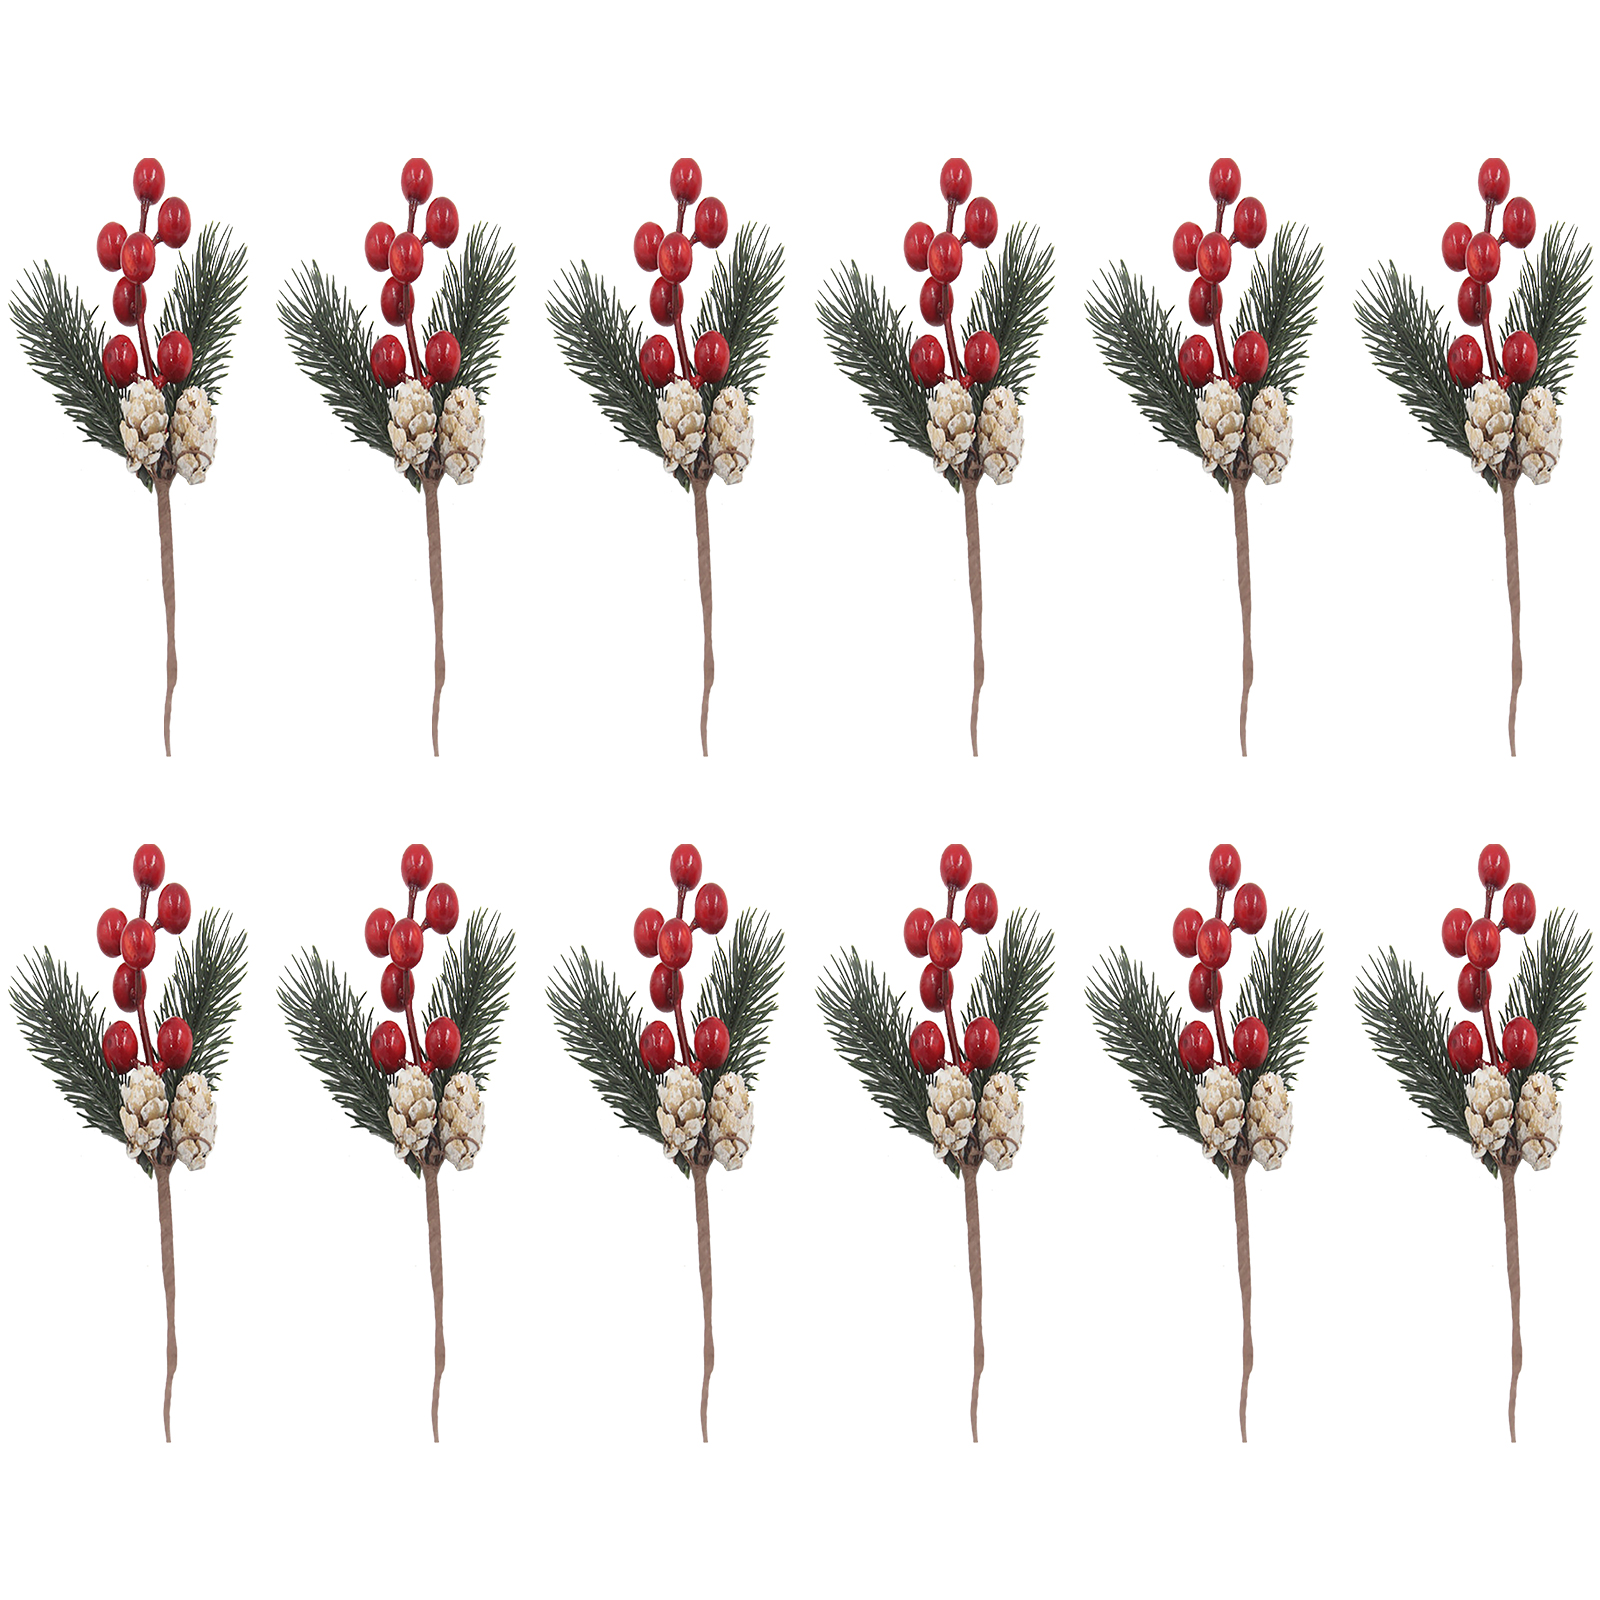 CreativeArrowy 12pcs Holly Branches Christmas Decoration Garland Material  Approximately 23cm In Length Gift Packing Plastic Pinecone Ornament -  Walmart.com